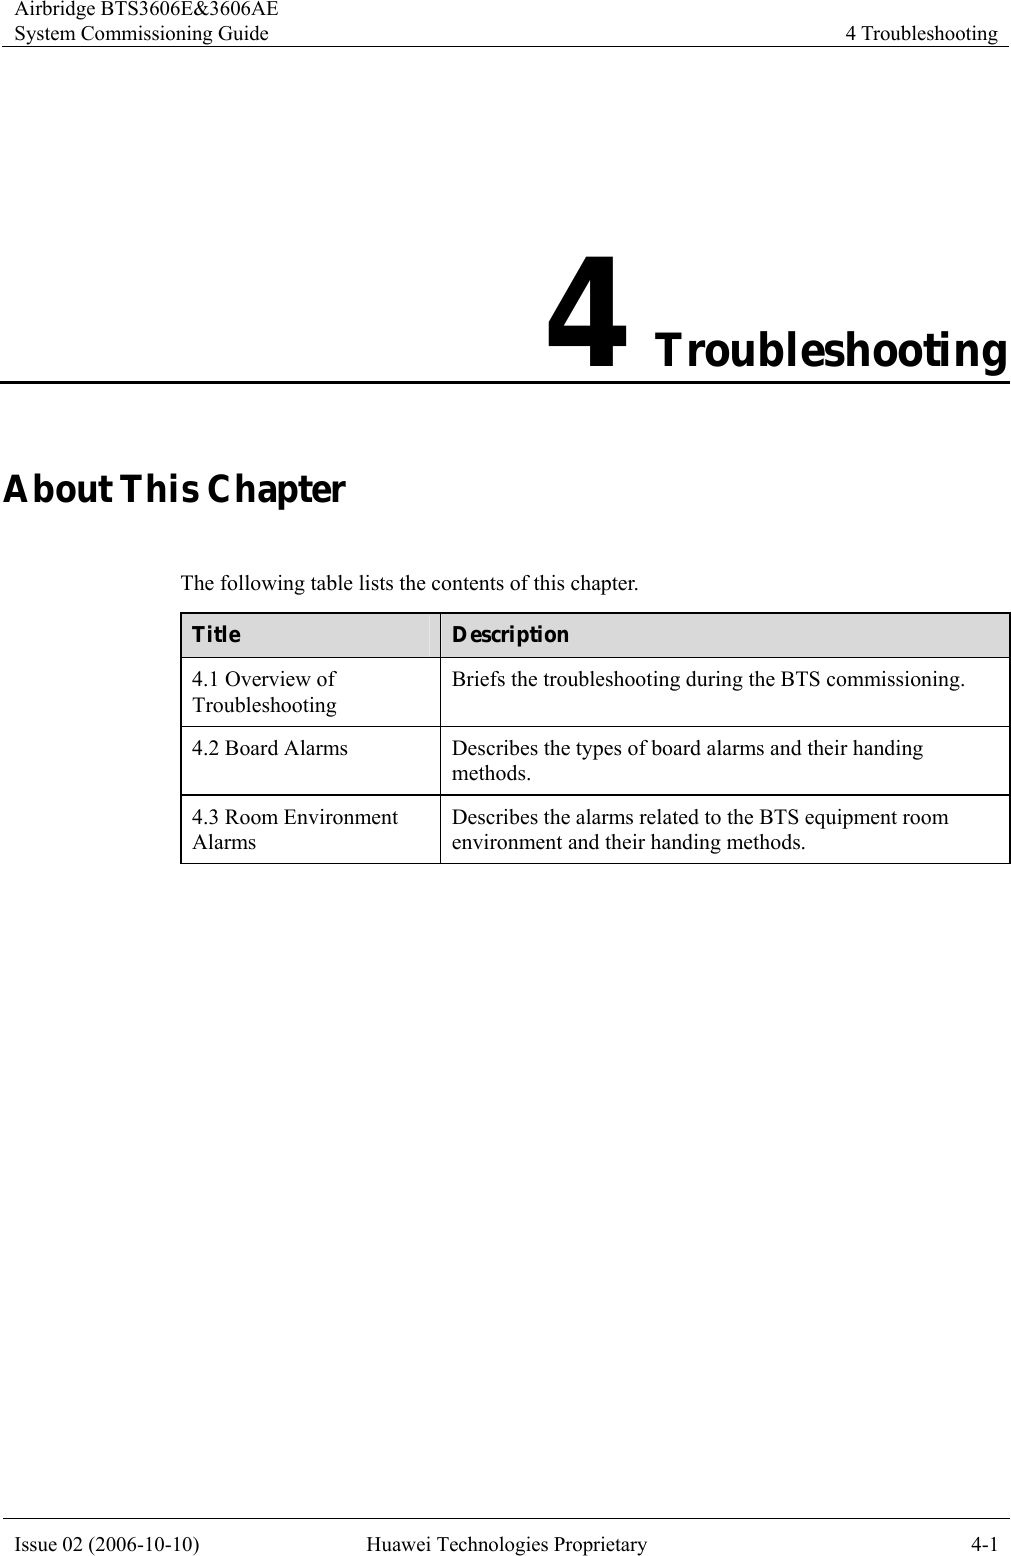 Airbridge BTS3606E&amp;3606AE System Commissioning Guide  4 Troubleshooting Issue 02 (2006-10-10)  Huawei Technologies Proprietary  4-1 4 Troubleshooting About This Chapter The following table lists the contents of this chapter. Title  Description 4.1 Overview of Troubleshooting Briefs the troubleshooting during the BTS commissioning.   4.2 Board Alarms  Describes the types of board alarms and their handing methods. 4.3 Room Environment Alarms Describes the alarms related to the BTS equipment room environment and their handing methods.  